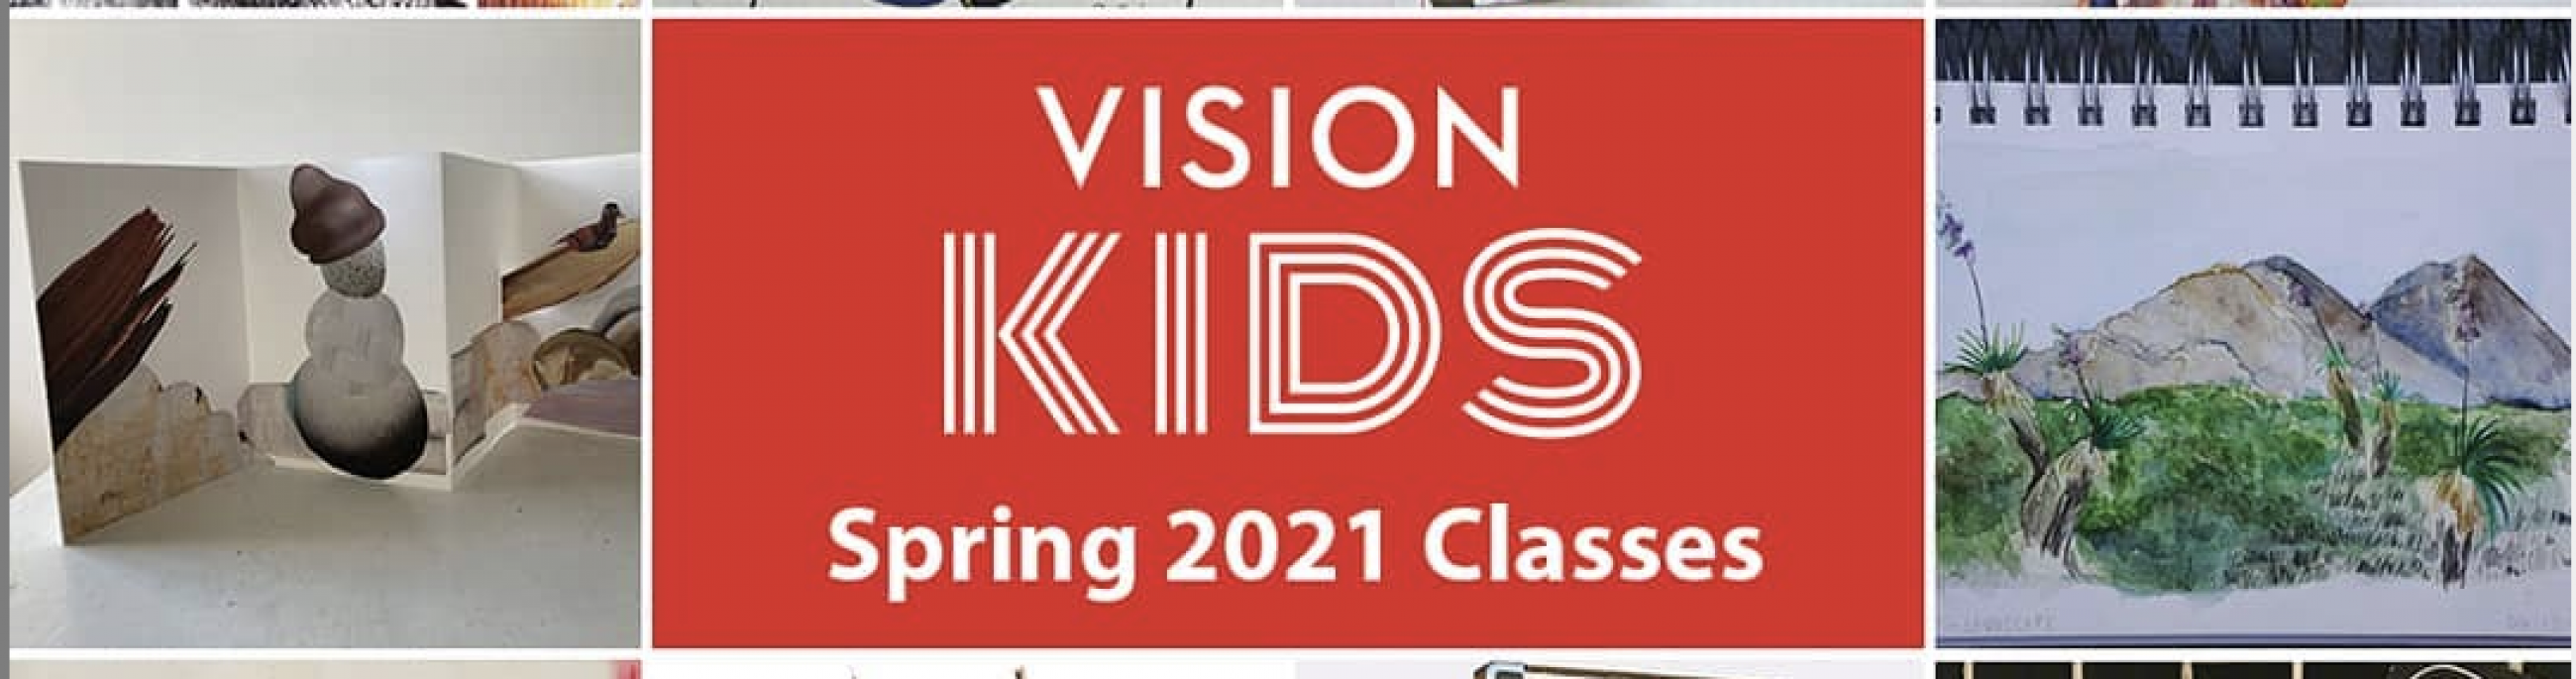 Vision Kids in white text on a red background. 